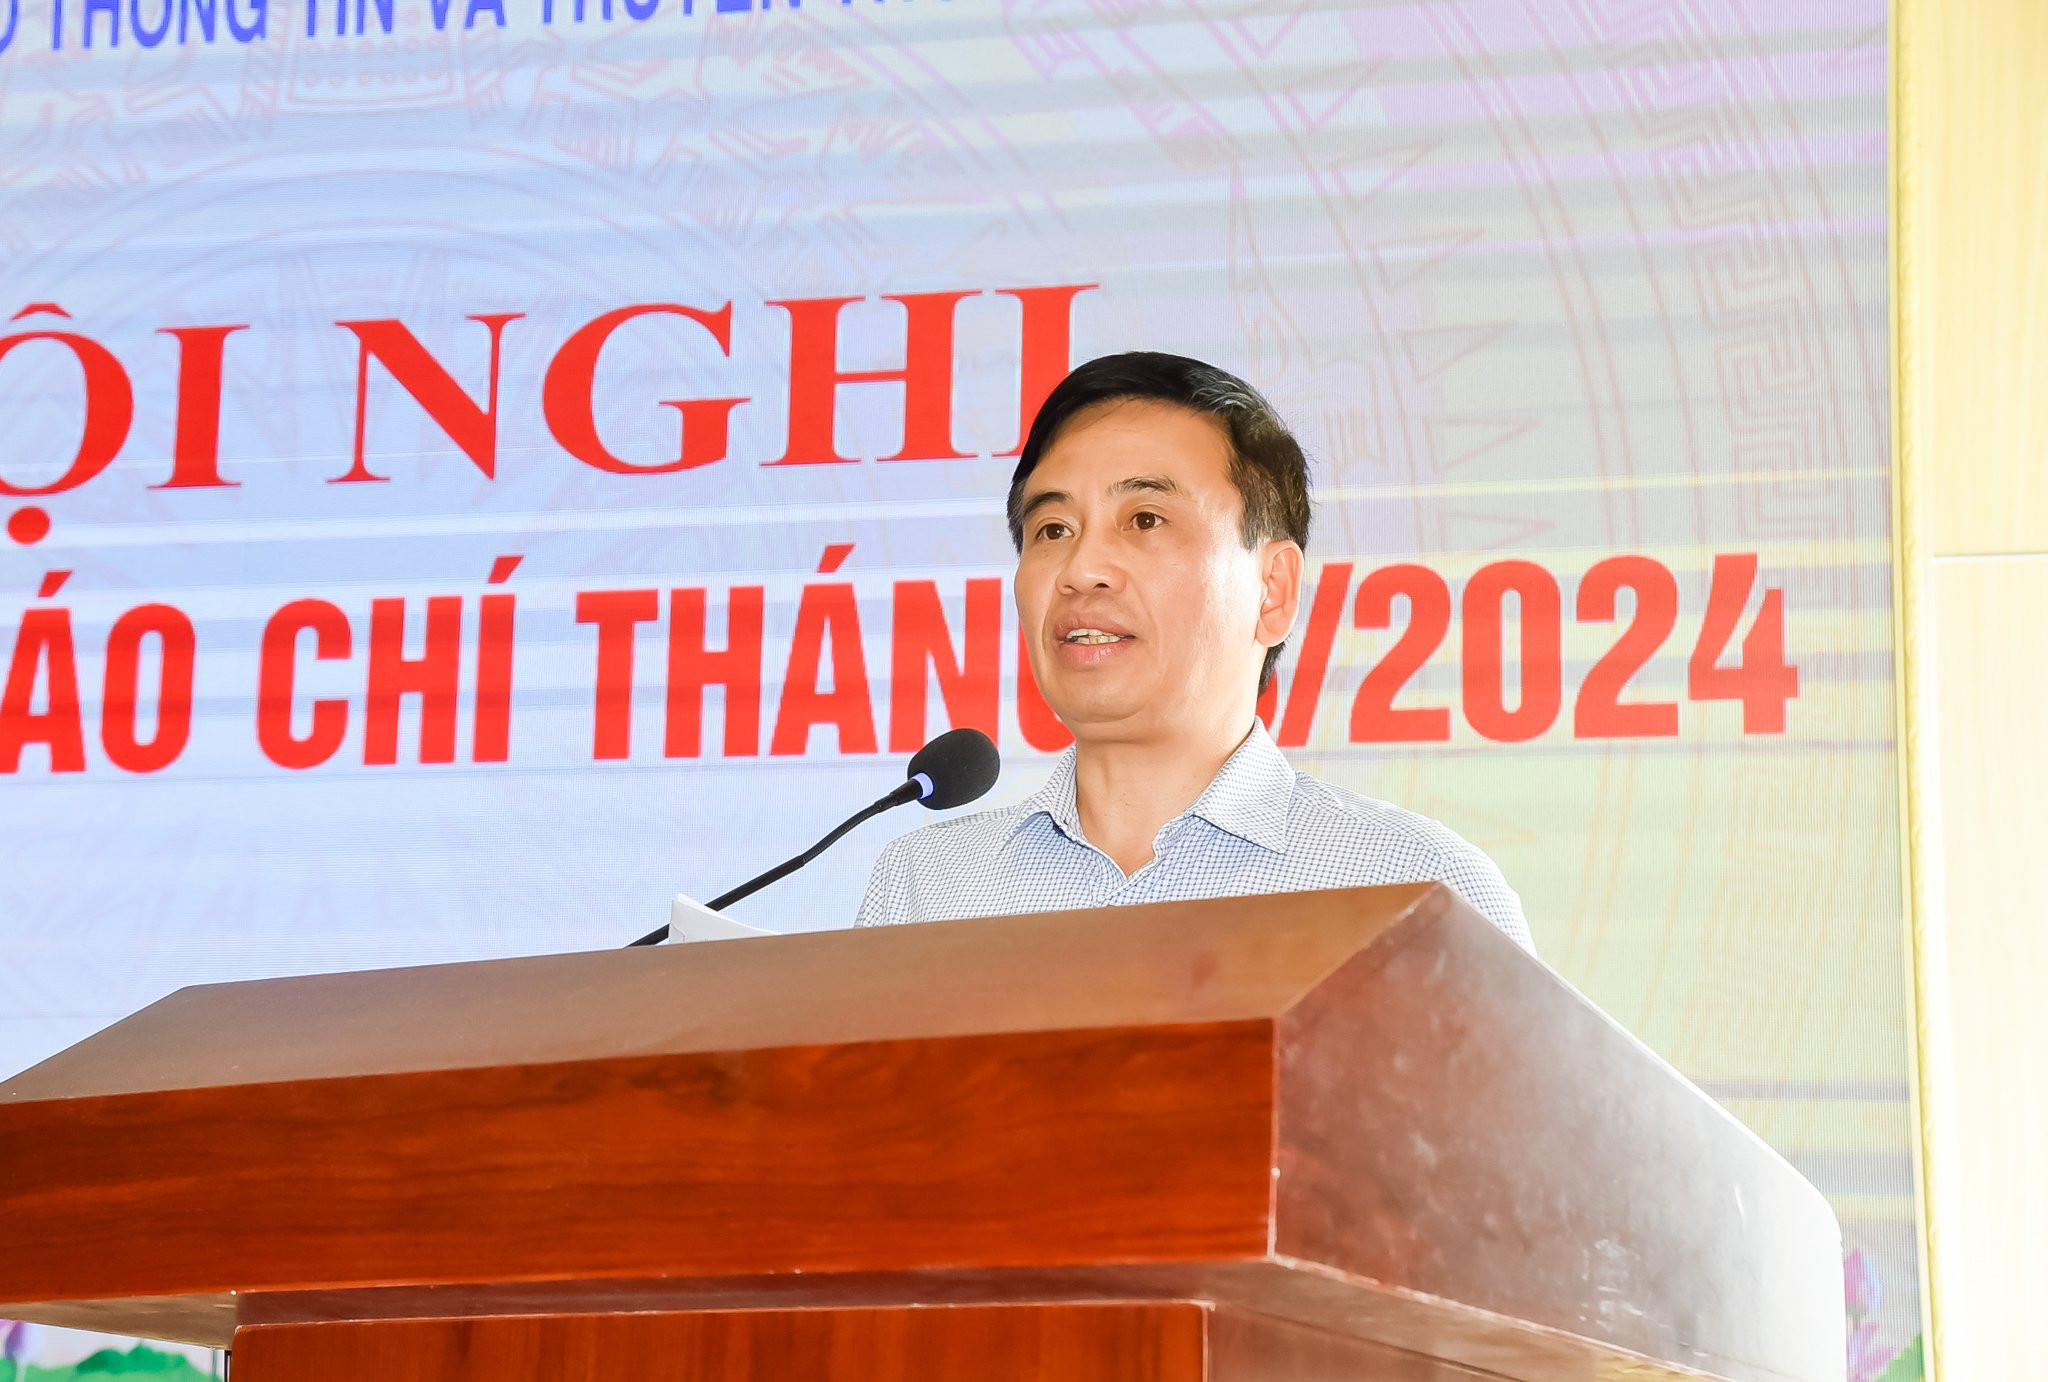 bna-a-hao-anh-thanh-le-7774.jpg